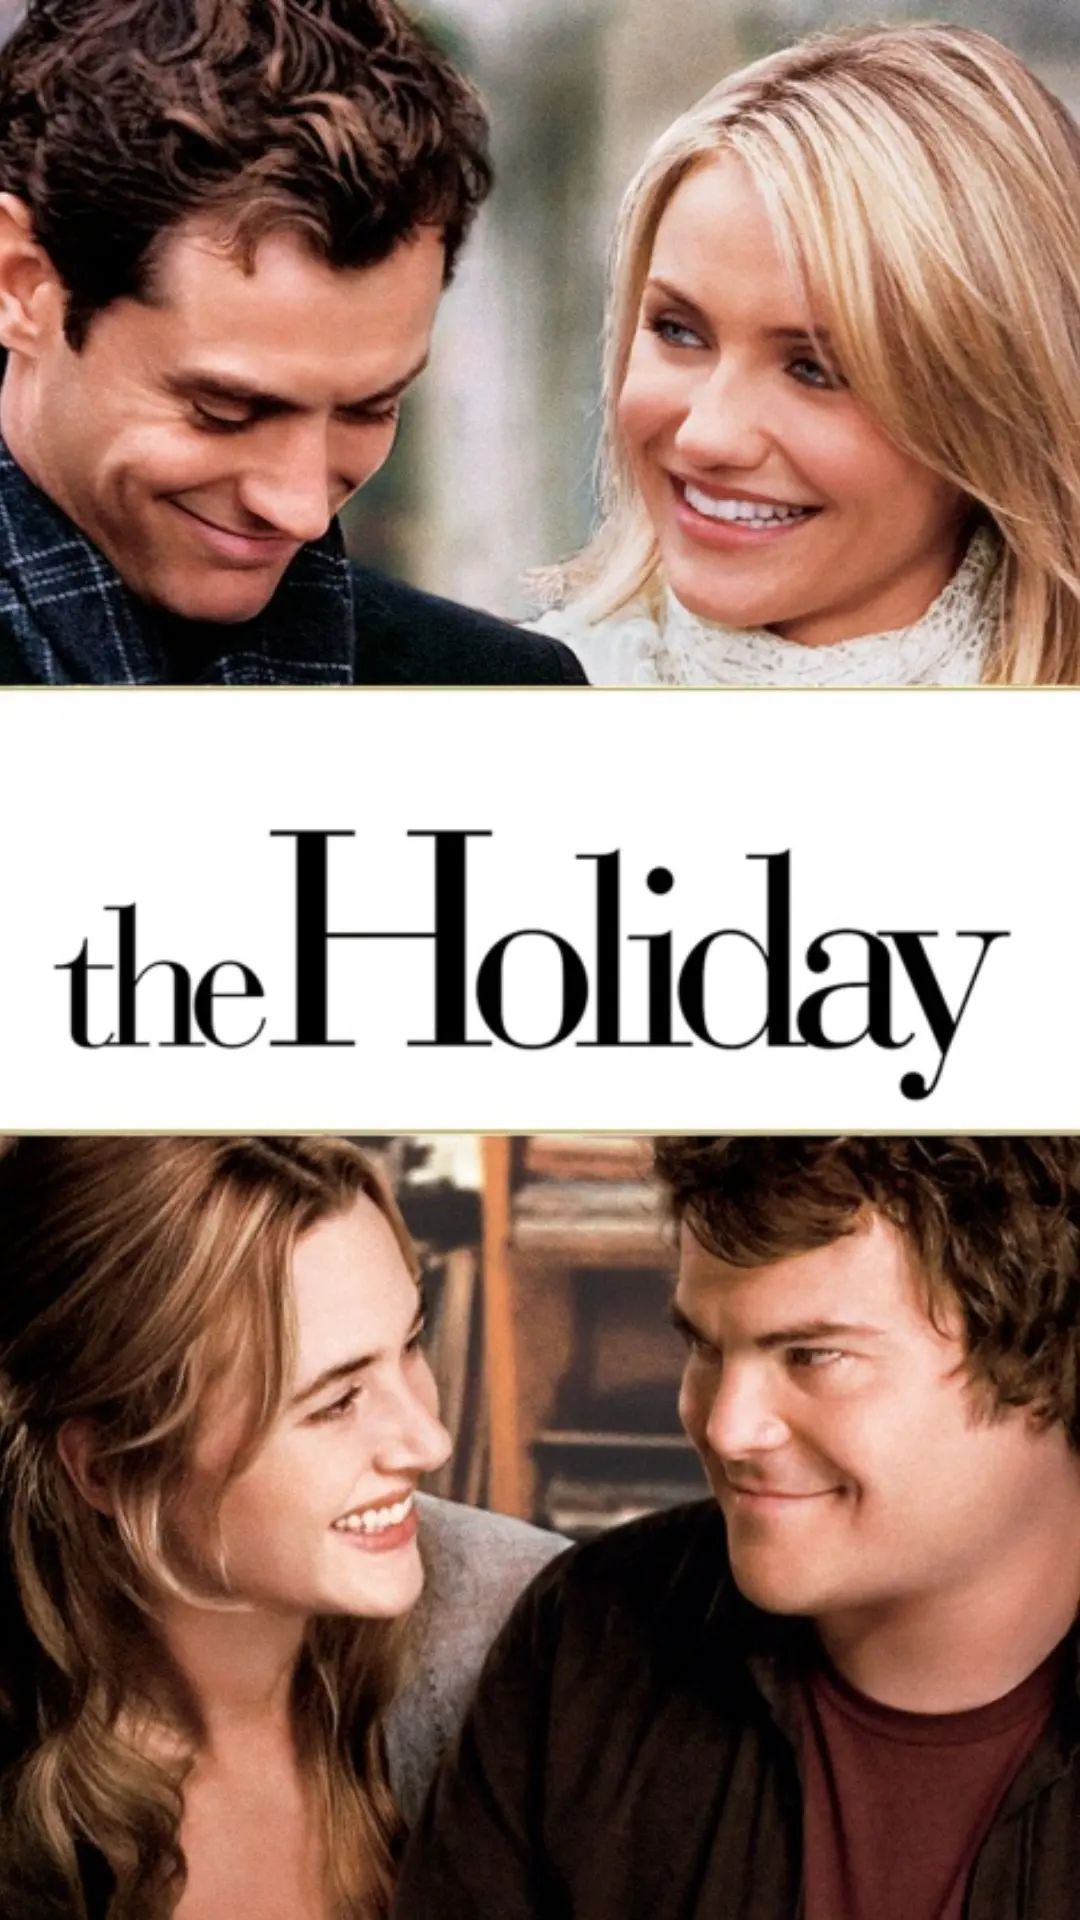 The Holiday Filming Locations